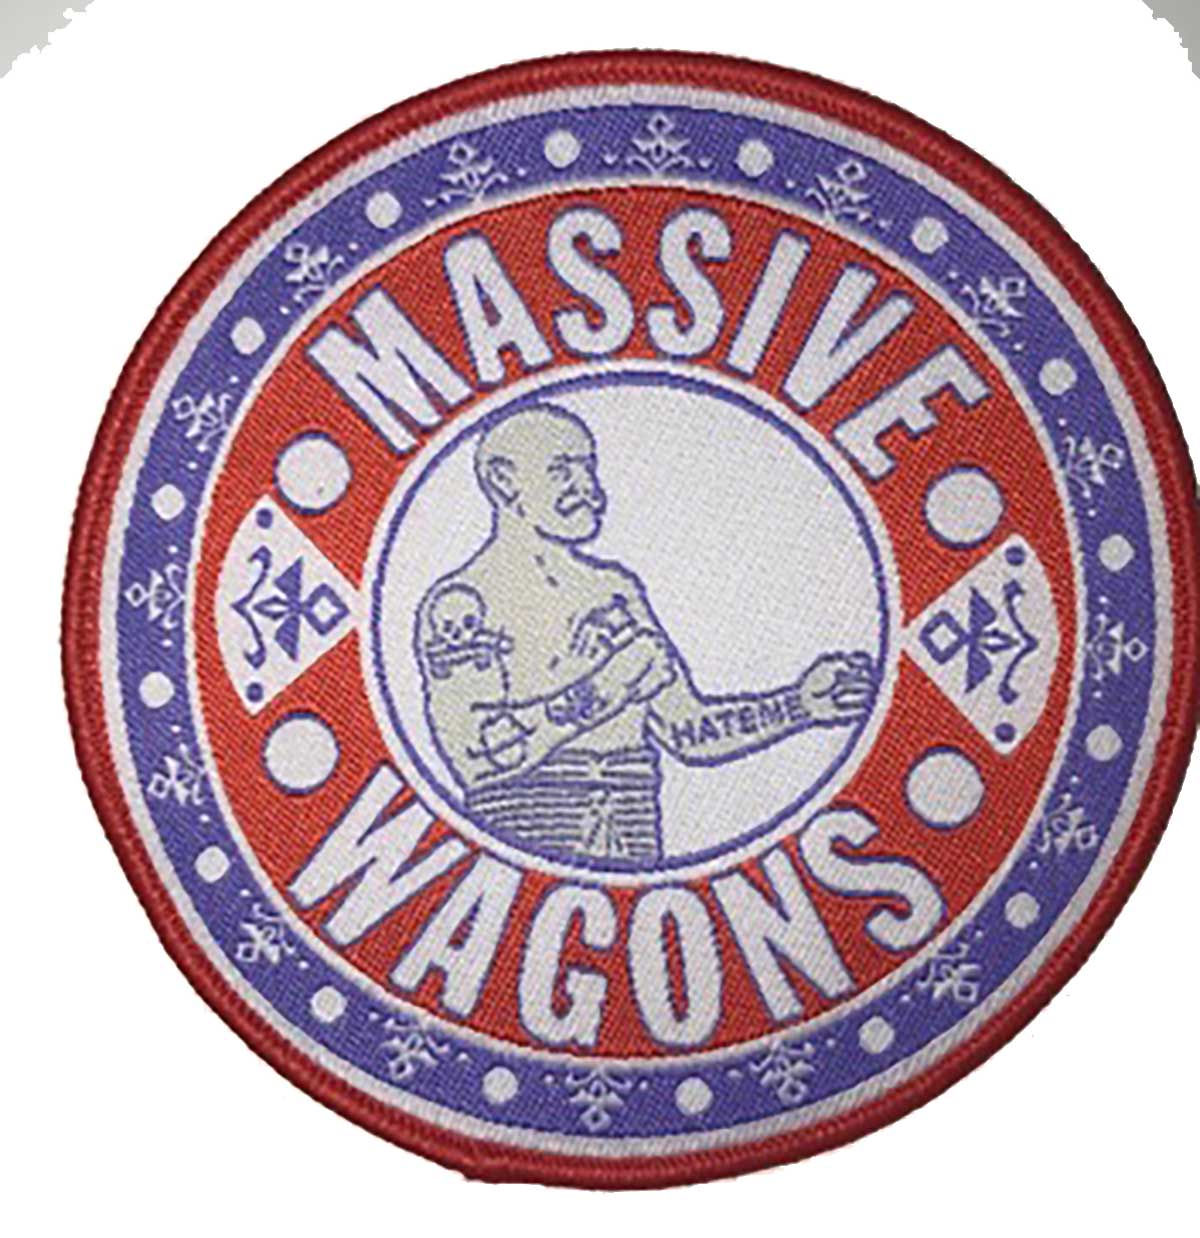 Massive Wagons "Full Nelson" Woven Patch